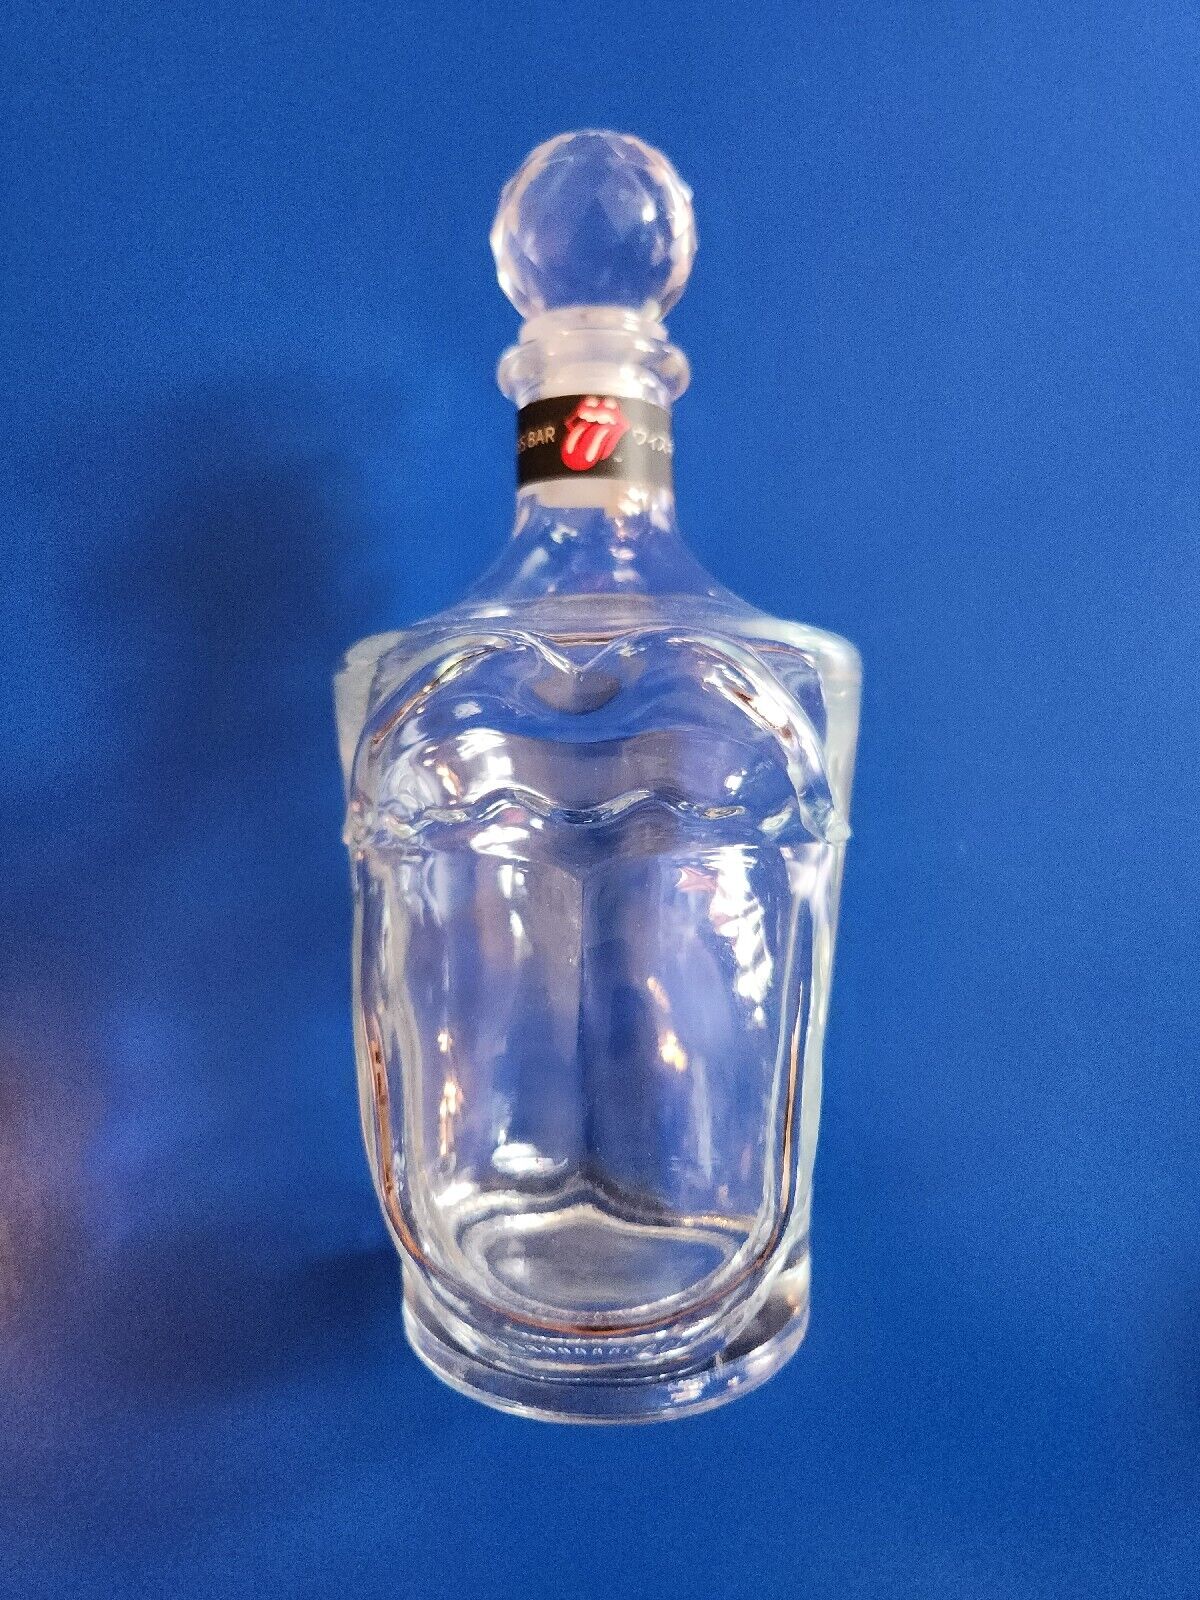 The Rolling Stones Mouth Bourbon Decanter